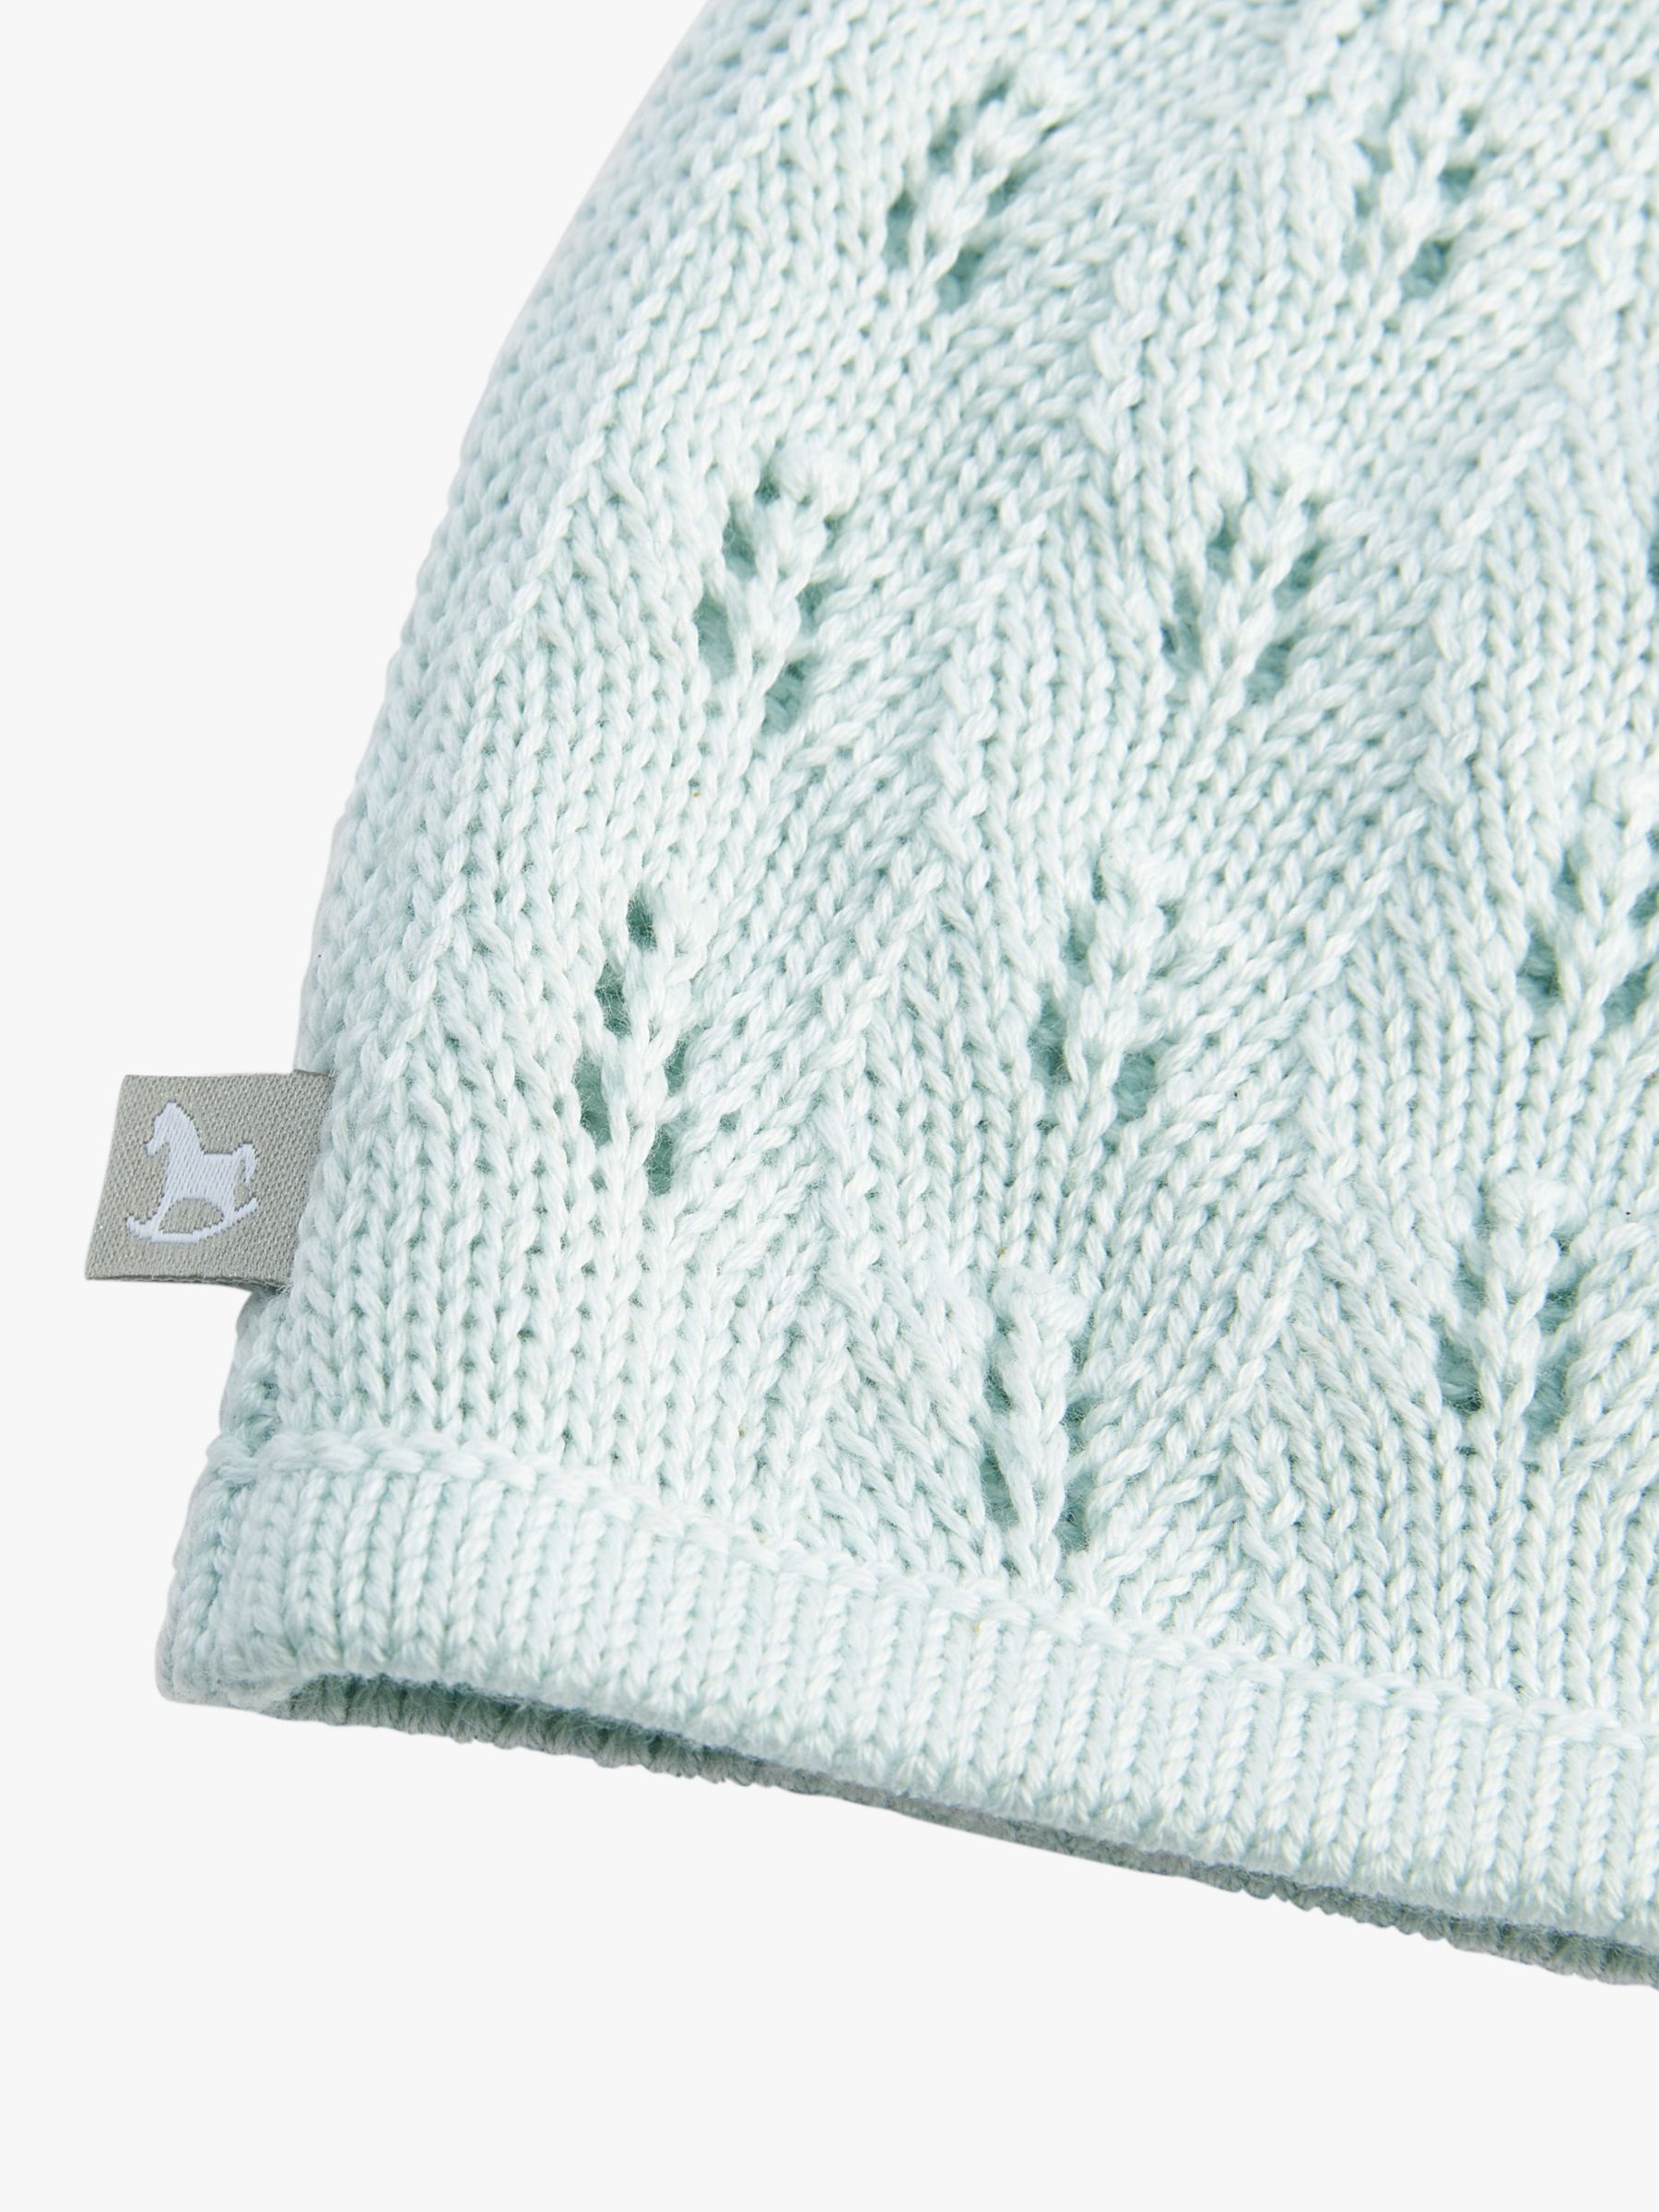 Buy The Little Tailor Pointelle Cotton Knit Baby Hat Online at johnlewis.com